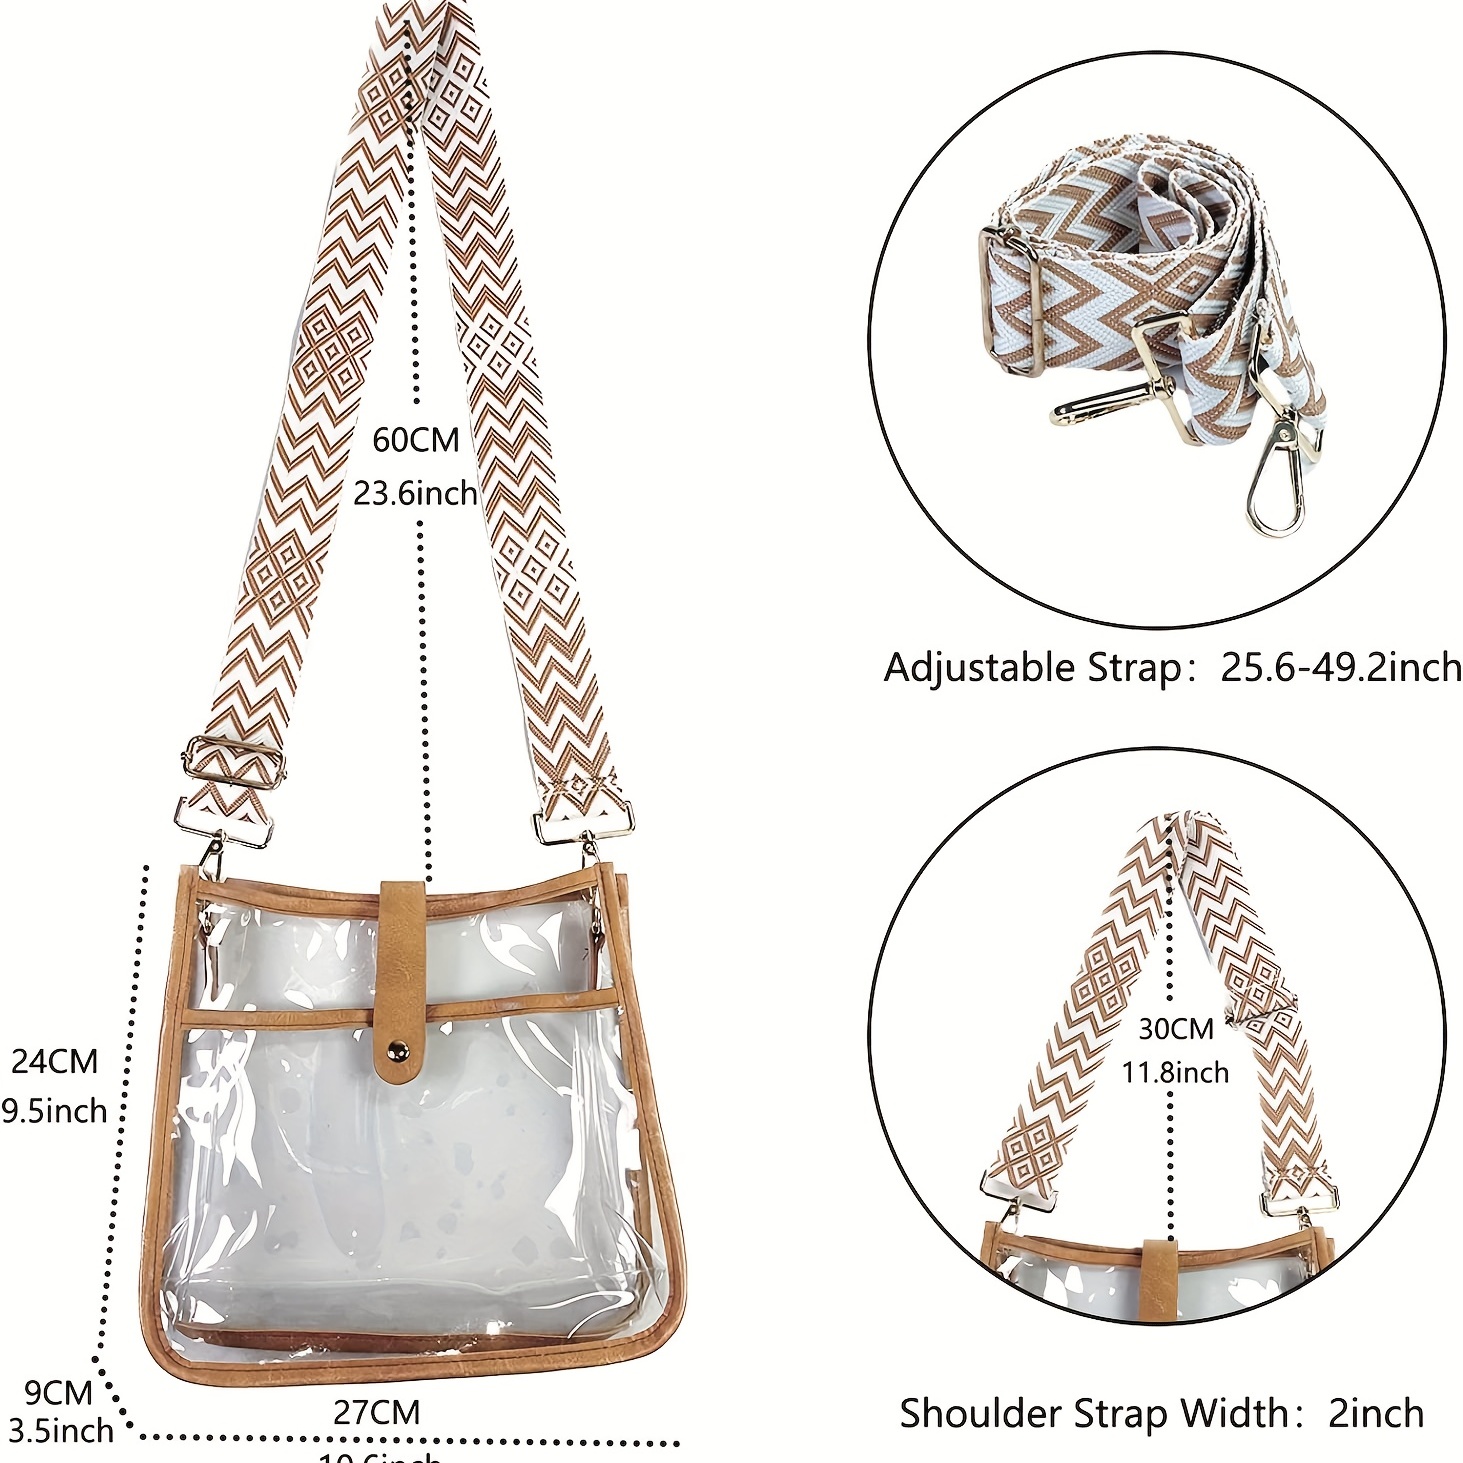  Clear Crossbody Purse Bag, Leopard Print PU Leather Bag,  Stadium Approved Clear Tote Bag for Concerts Sports Events : Clothing,  Shoes & Jewelry